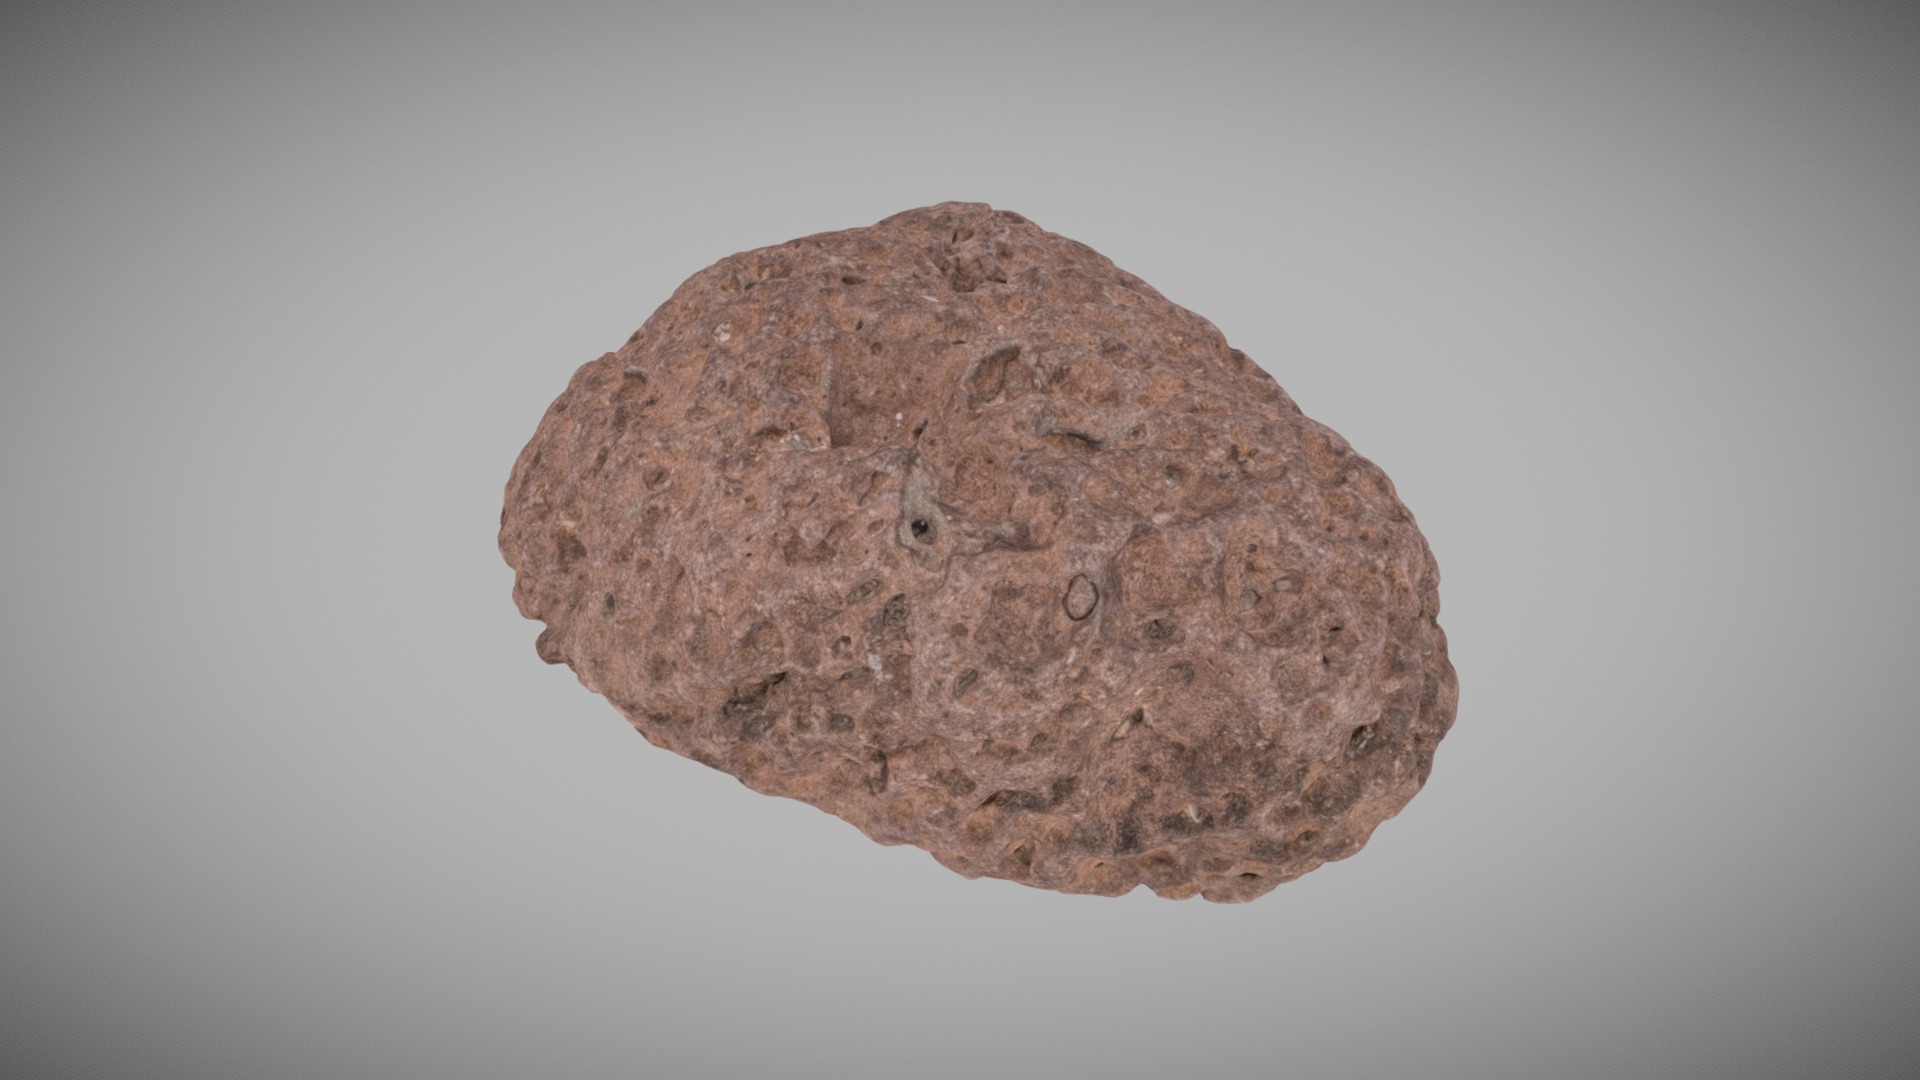 3D model Porous Igneous Rock - This is a 3D model of the Porous Igneous Rock. The 3D model is about a brown rock with a black speckled surface.